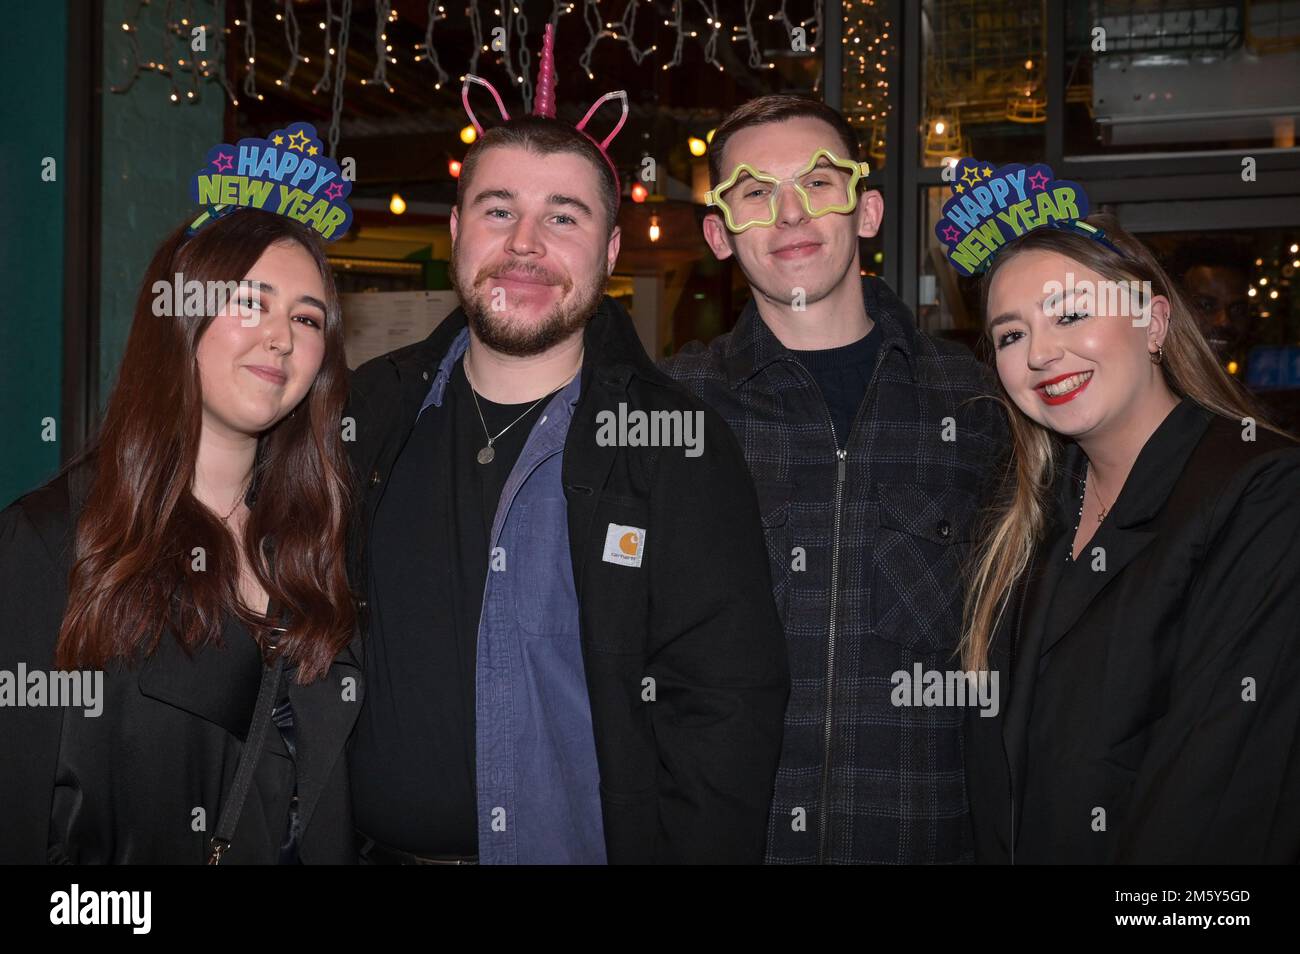 Wardwick, Derby, December 31st 2022. - Revellers enjoy themselves on NYE into 2023 in Derby city centre. Thousands of partygoers are expected to pack the bars and clubs as celebrations continued into the night. Credit: Ben Formby/Alamy Live News Stock Photo